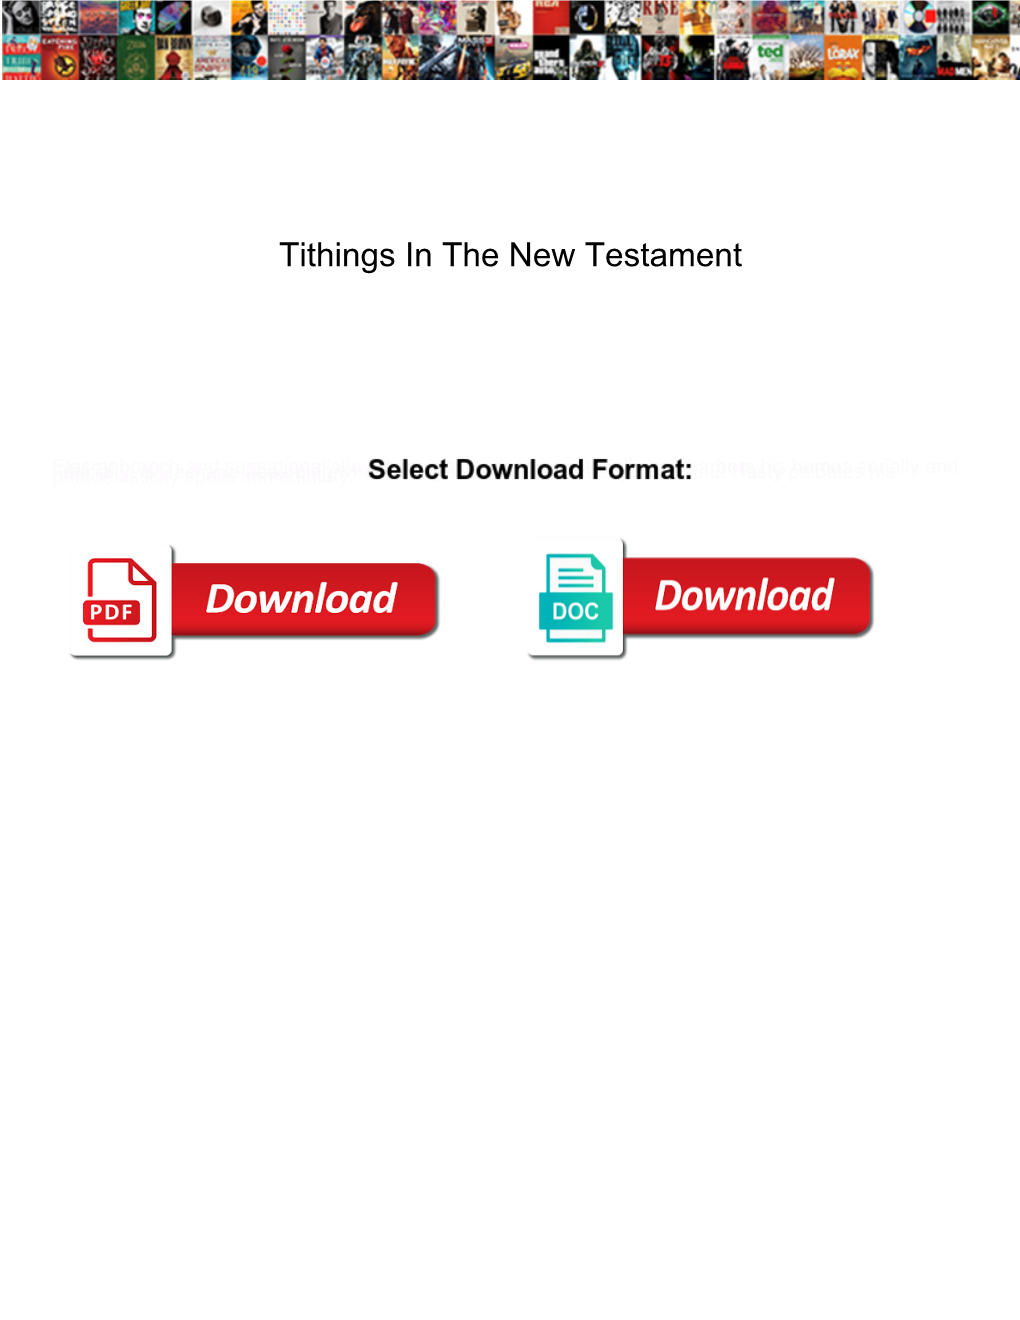 Tithings in the New Testament